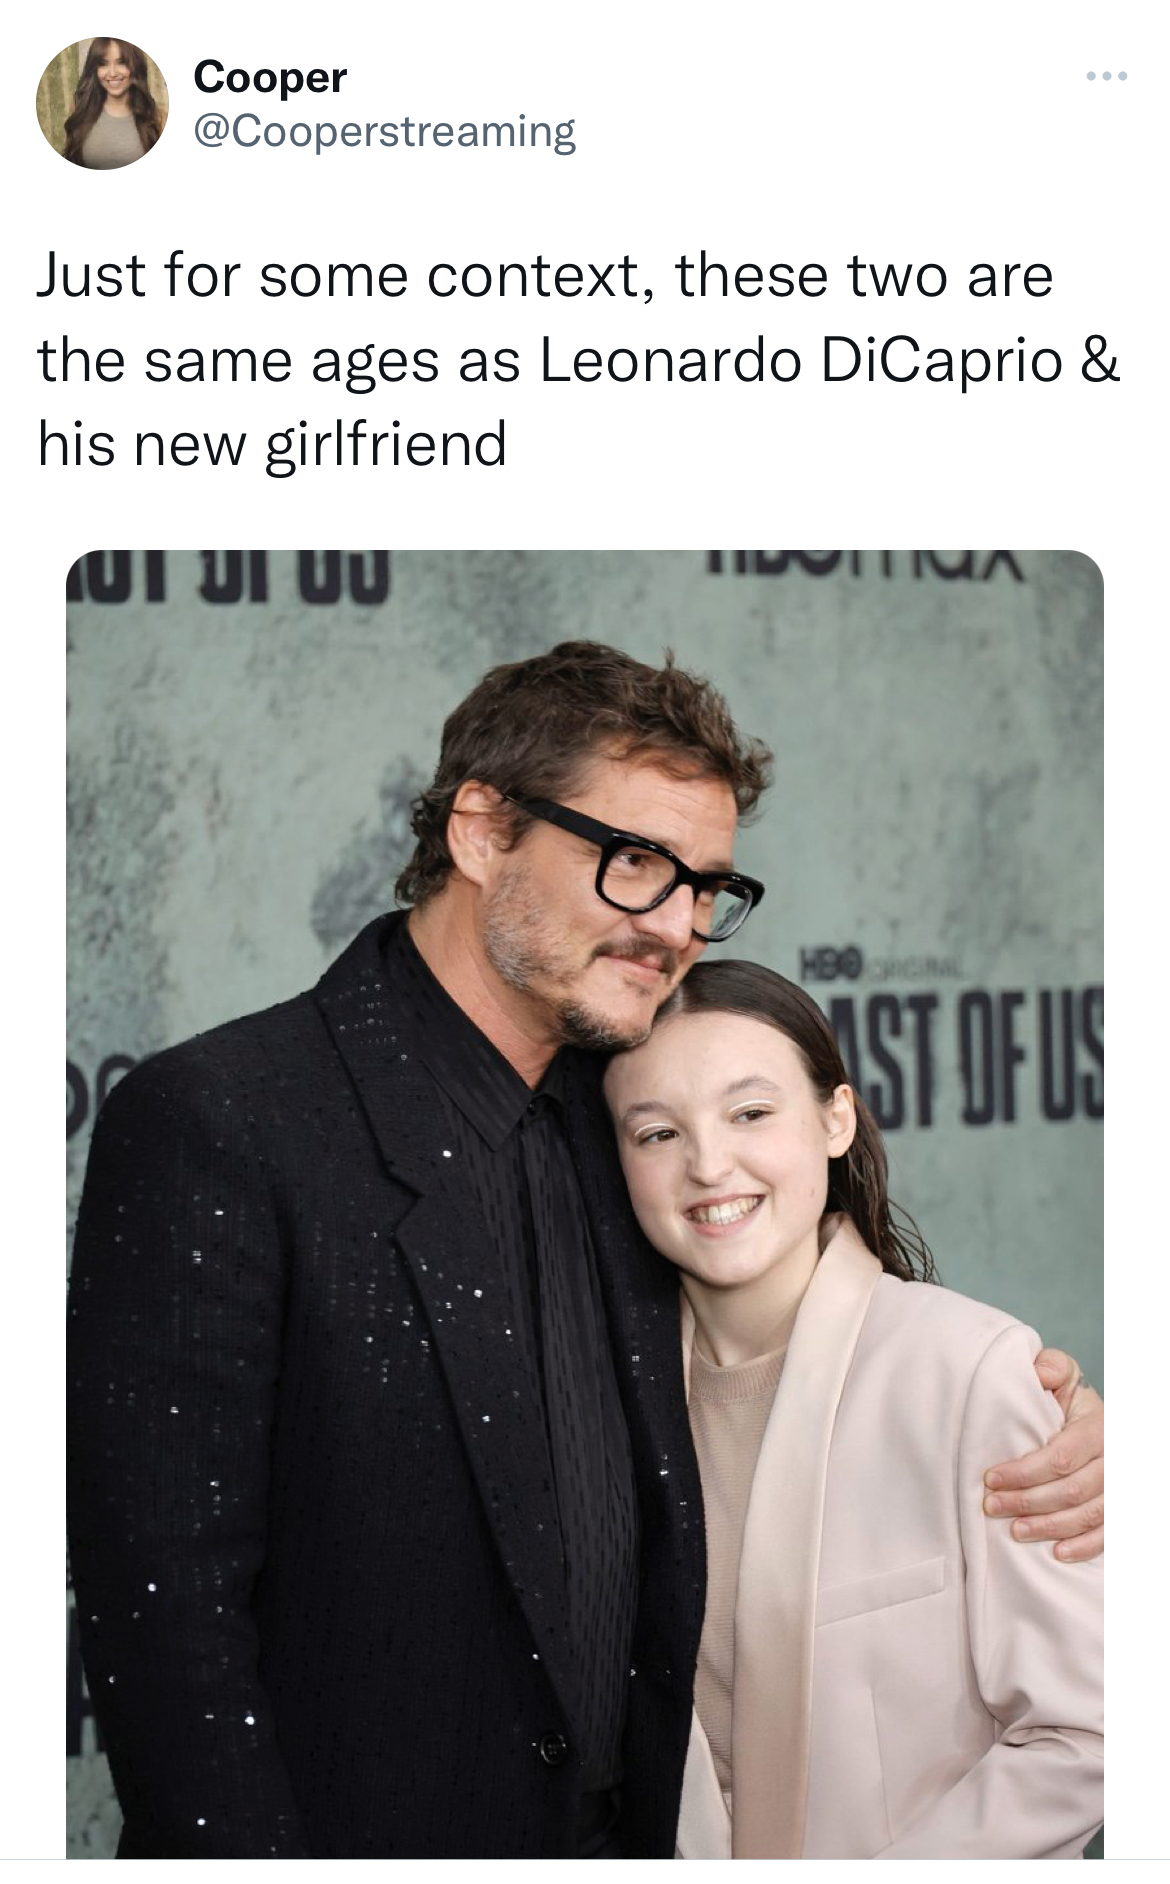 Leonardo DiCaprio Girlfriend Memes - bella ramsey and pedro pascal - Cooper www Just for some context, these two are the same ages as Leonardo DiCaprio & his new girlfriend 01 01 00 Beitra Ast Of Us